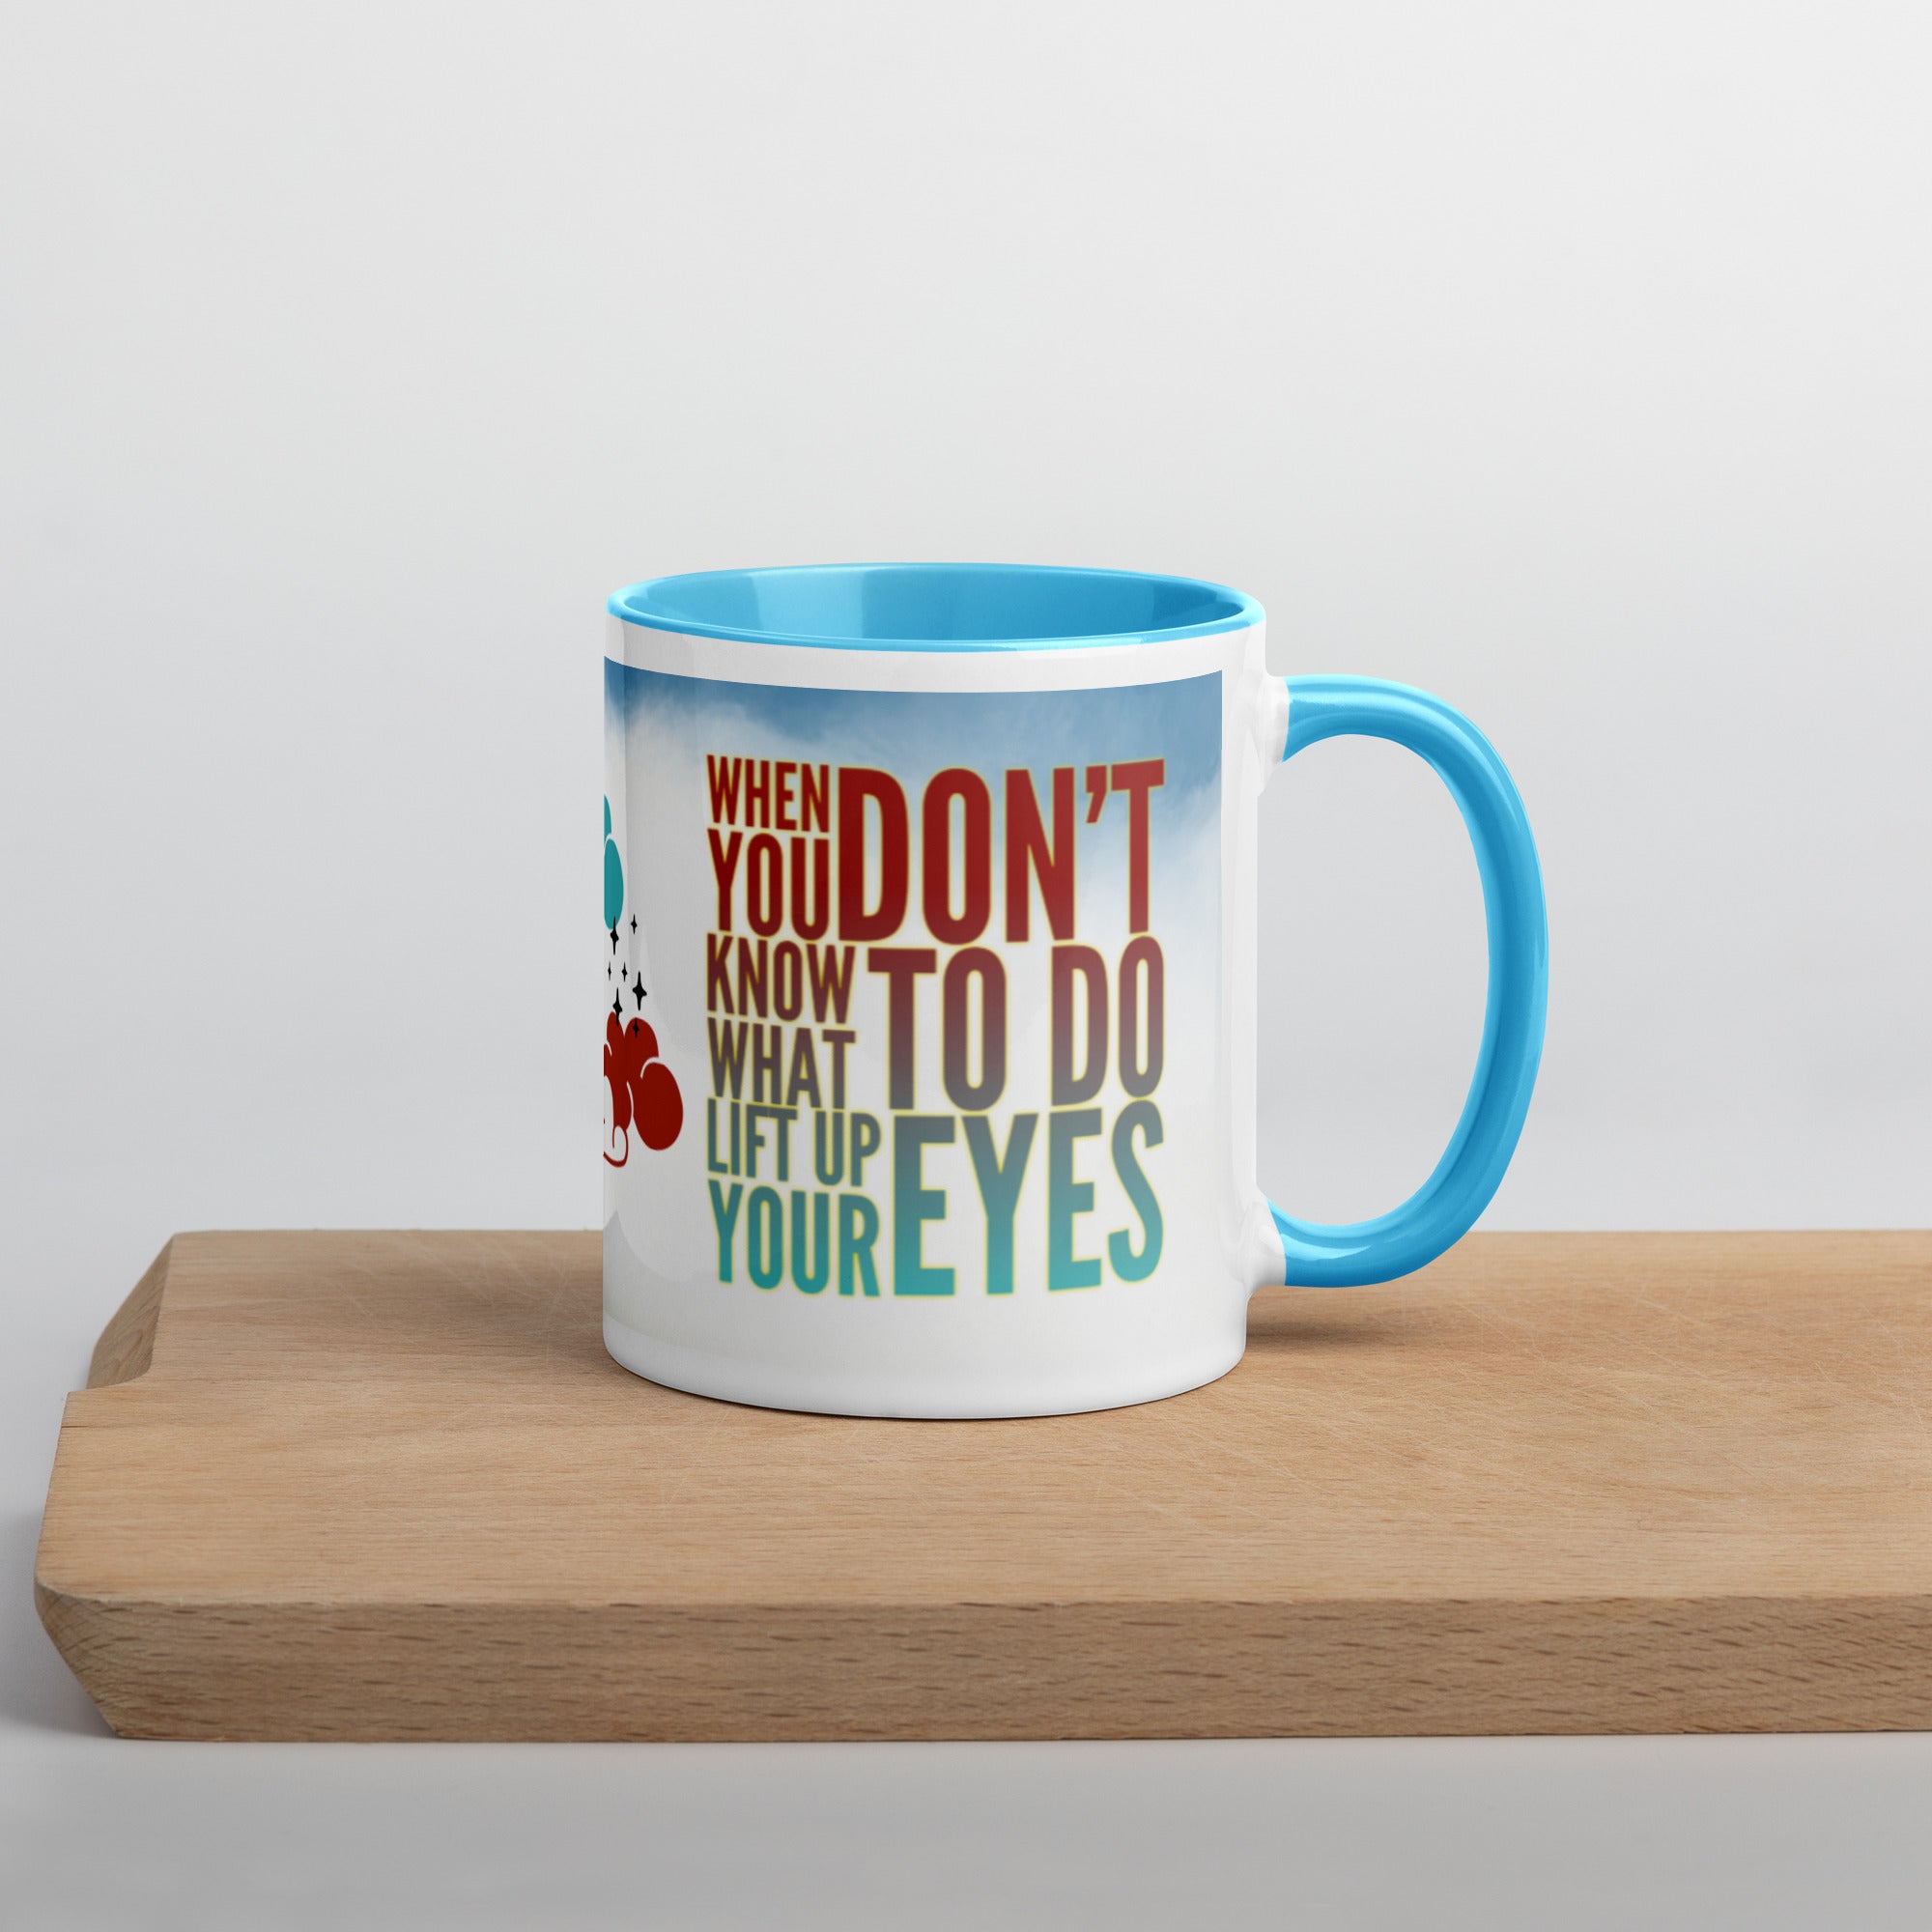 GloWell Designs - Mug with Color Inside - Motivational Quote - Lift Up Your Eyes - GloWell Designs